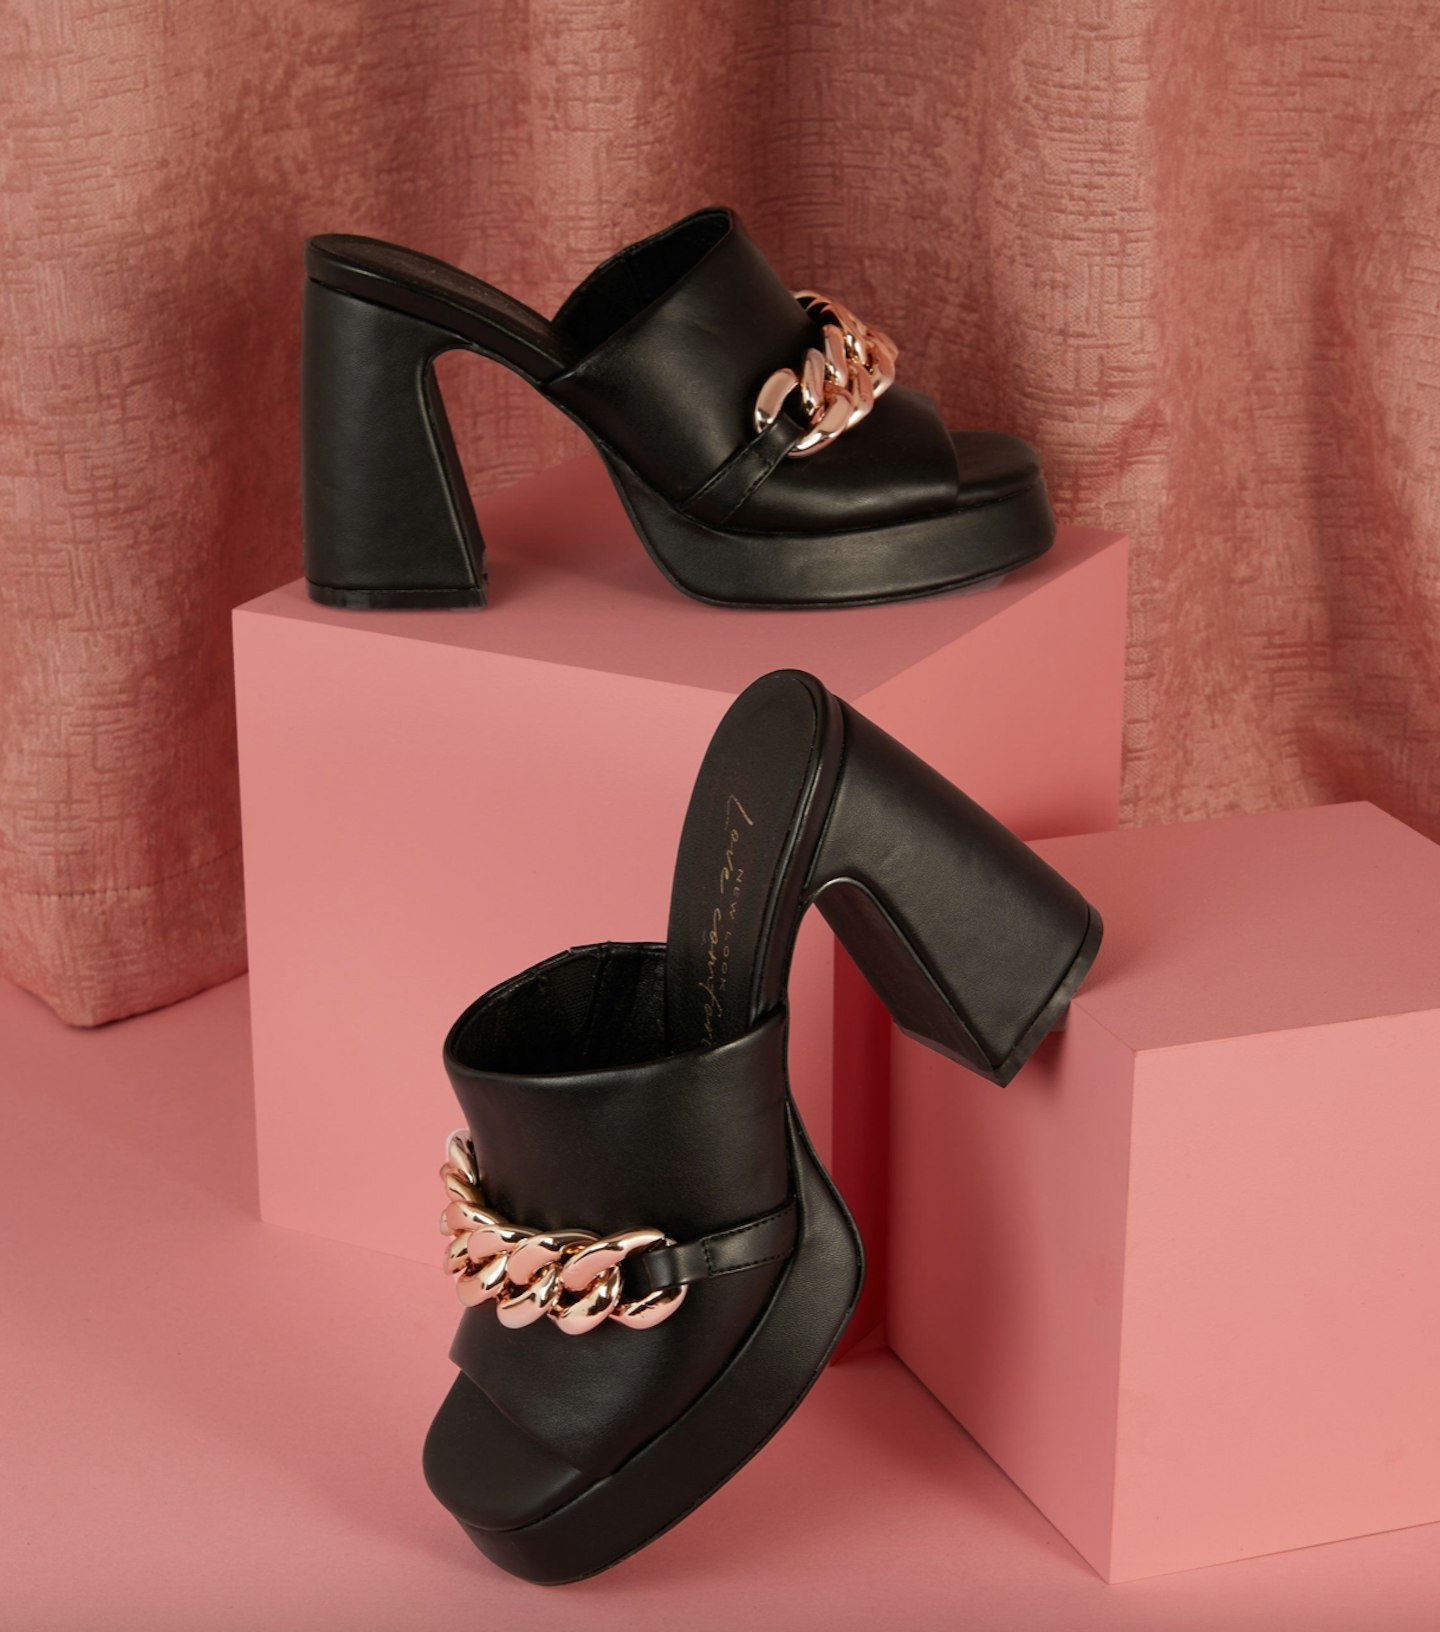 Oh a High Black Leather-Look Chain Block Platform Heeled Mules, £32.99